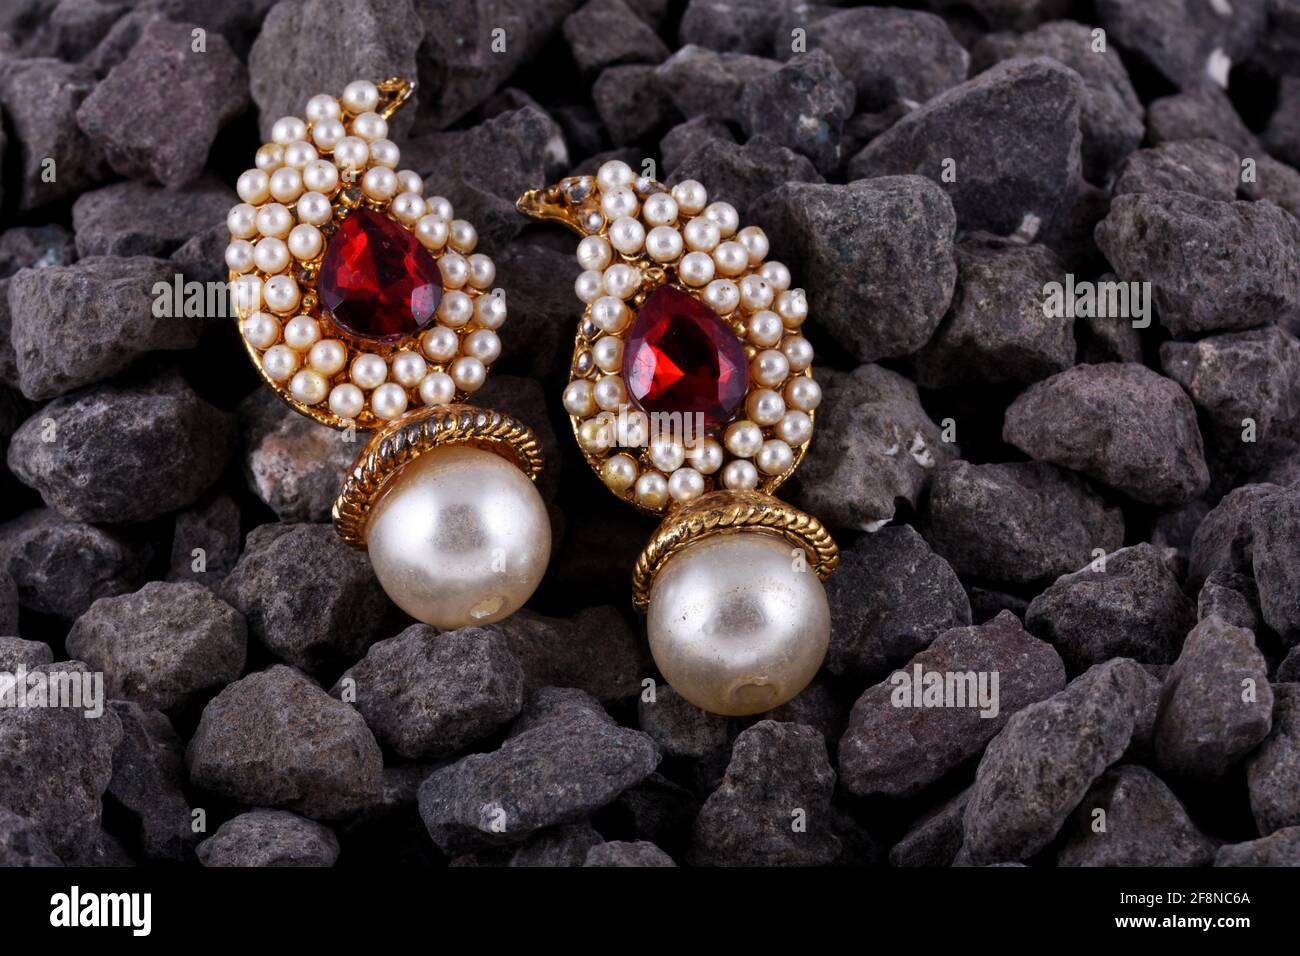 Pearl earrings with ruby gem, Indian traditional jewellery, Indian jewelry Stock Photo